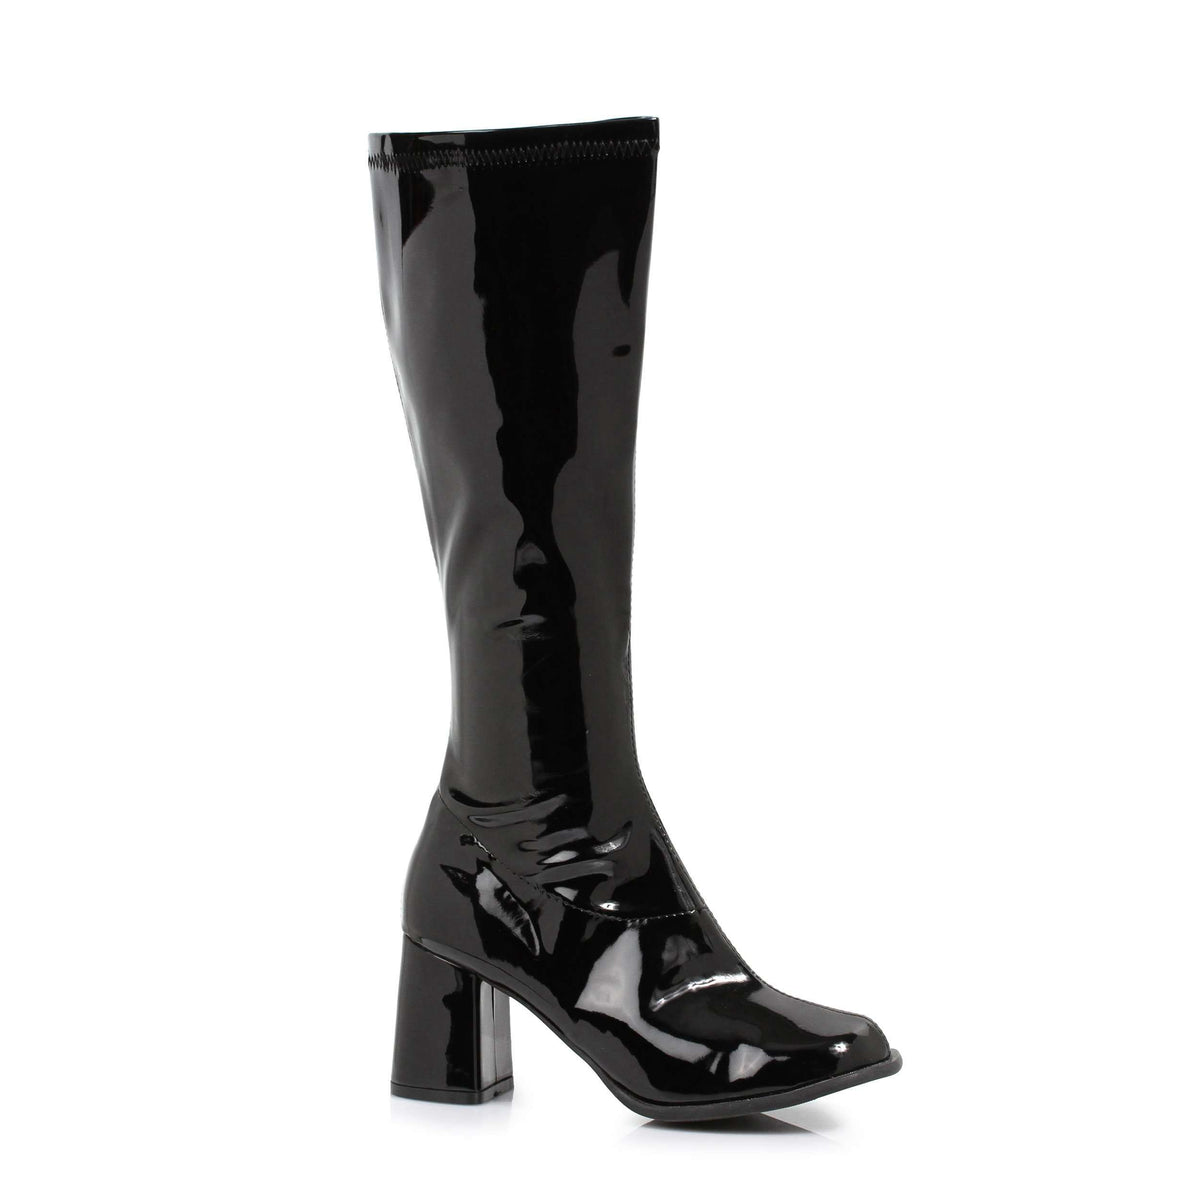 Groovy Mid-Calf 3" Gogo Boots with Zipper